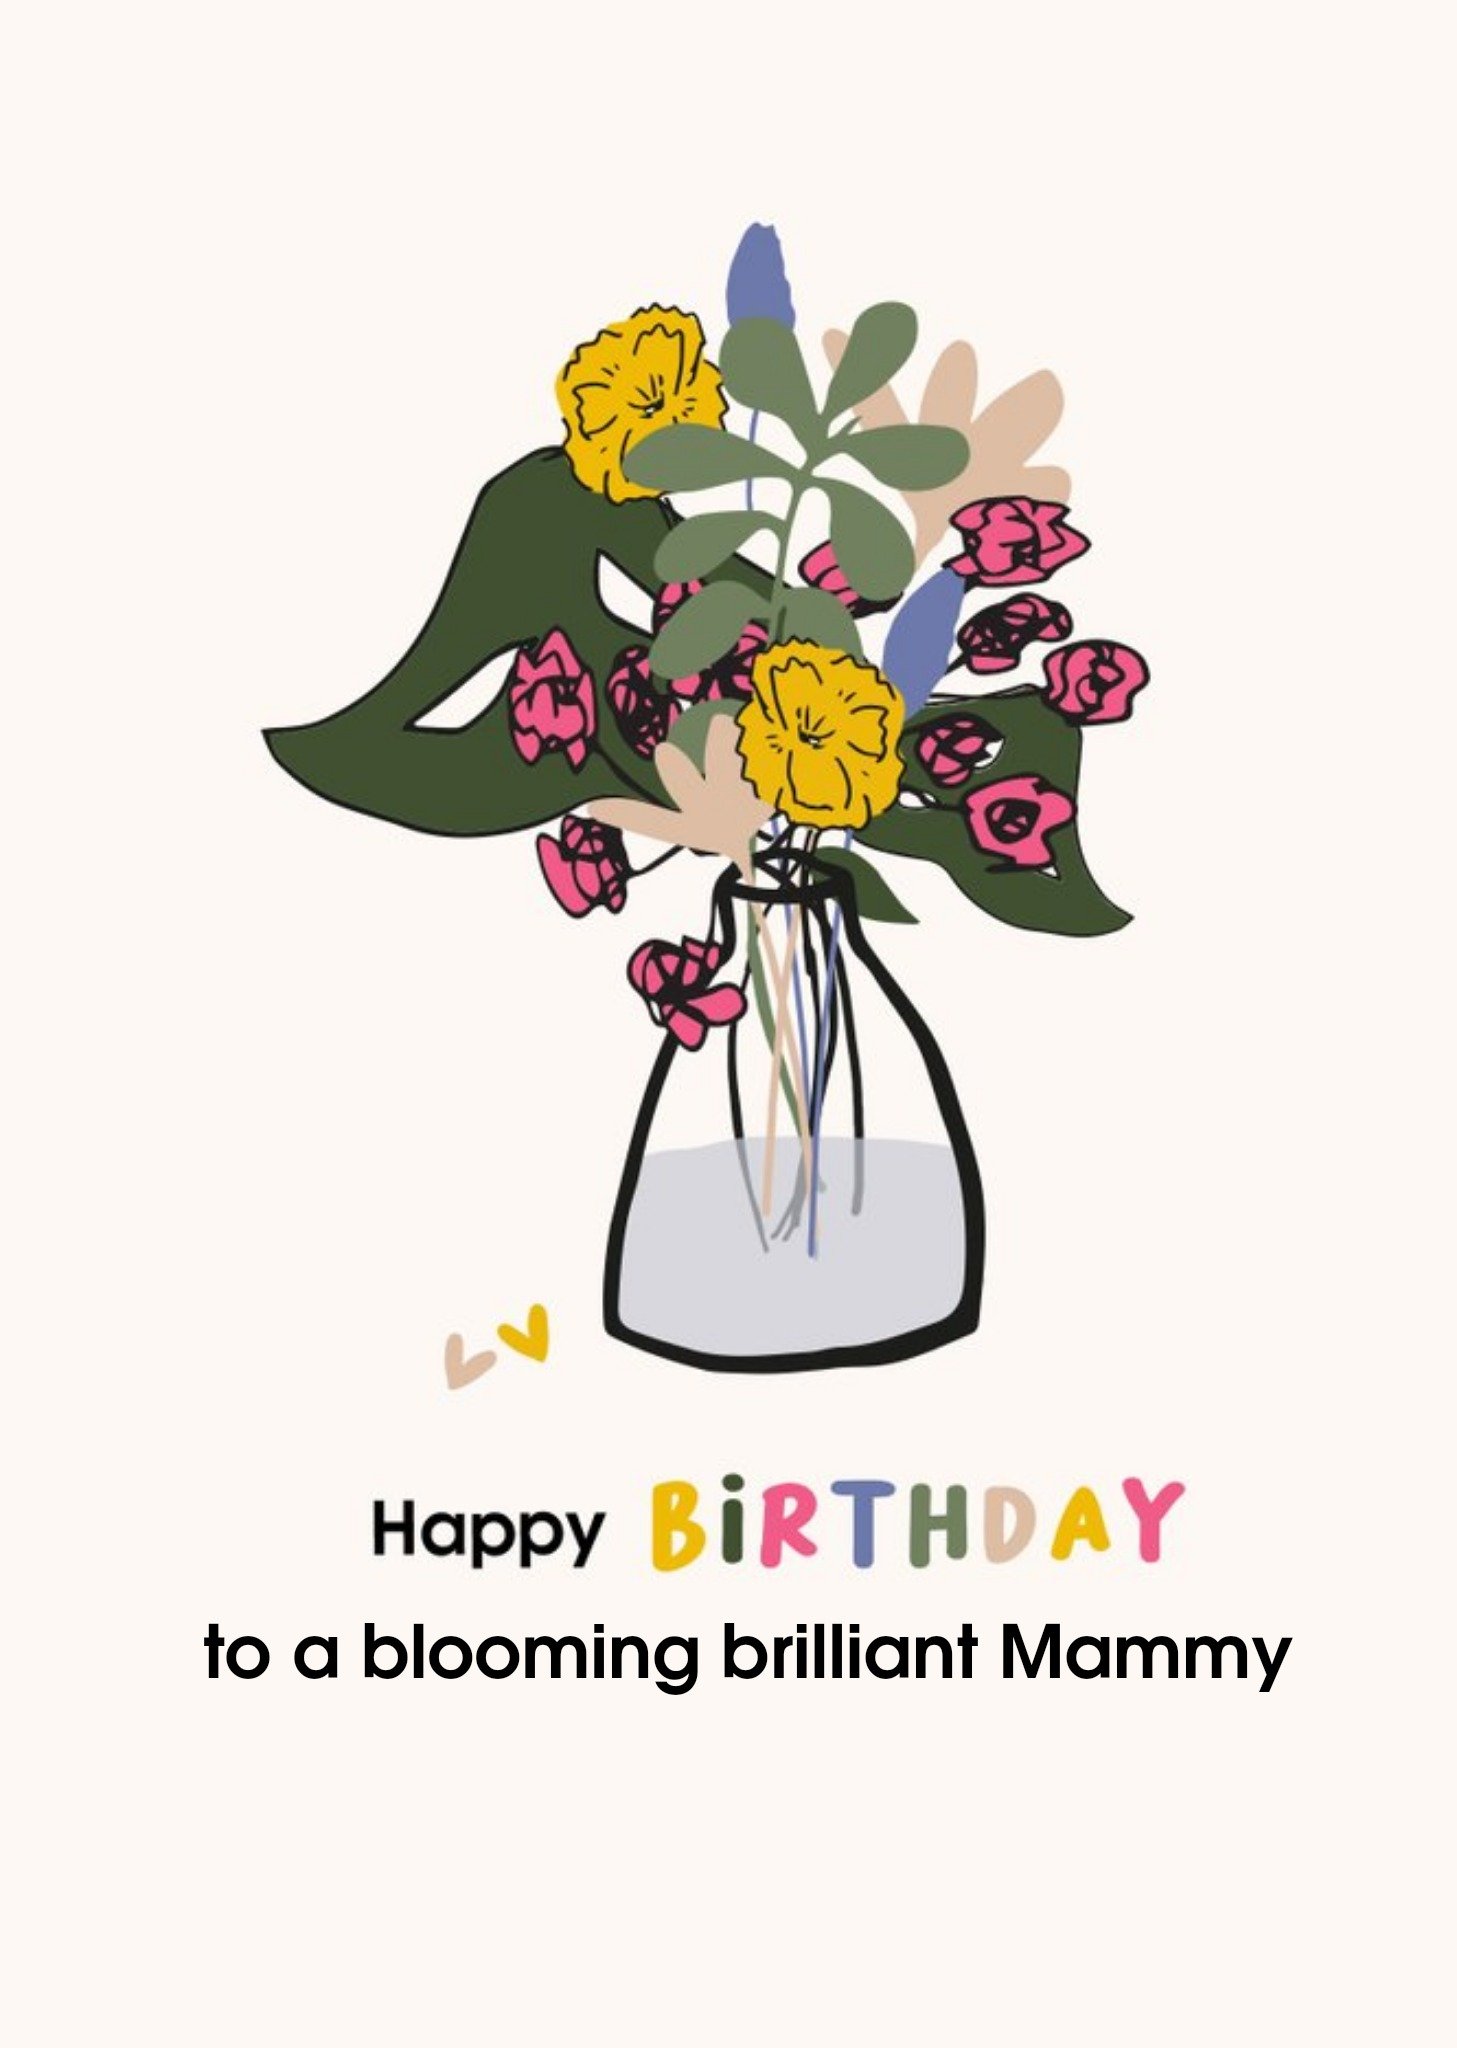 Moonpig Cute Illustrated Flower And Vase Brilliant Mammy Birthday Card, Large